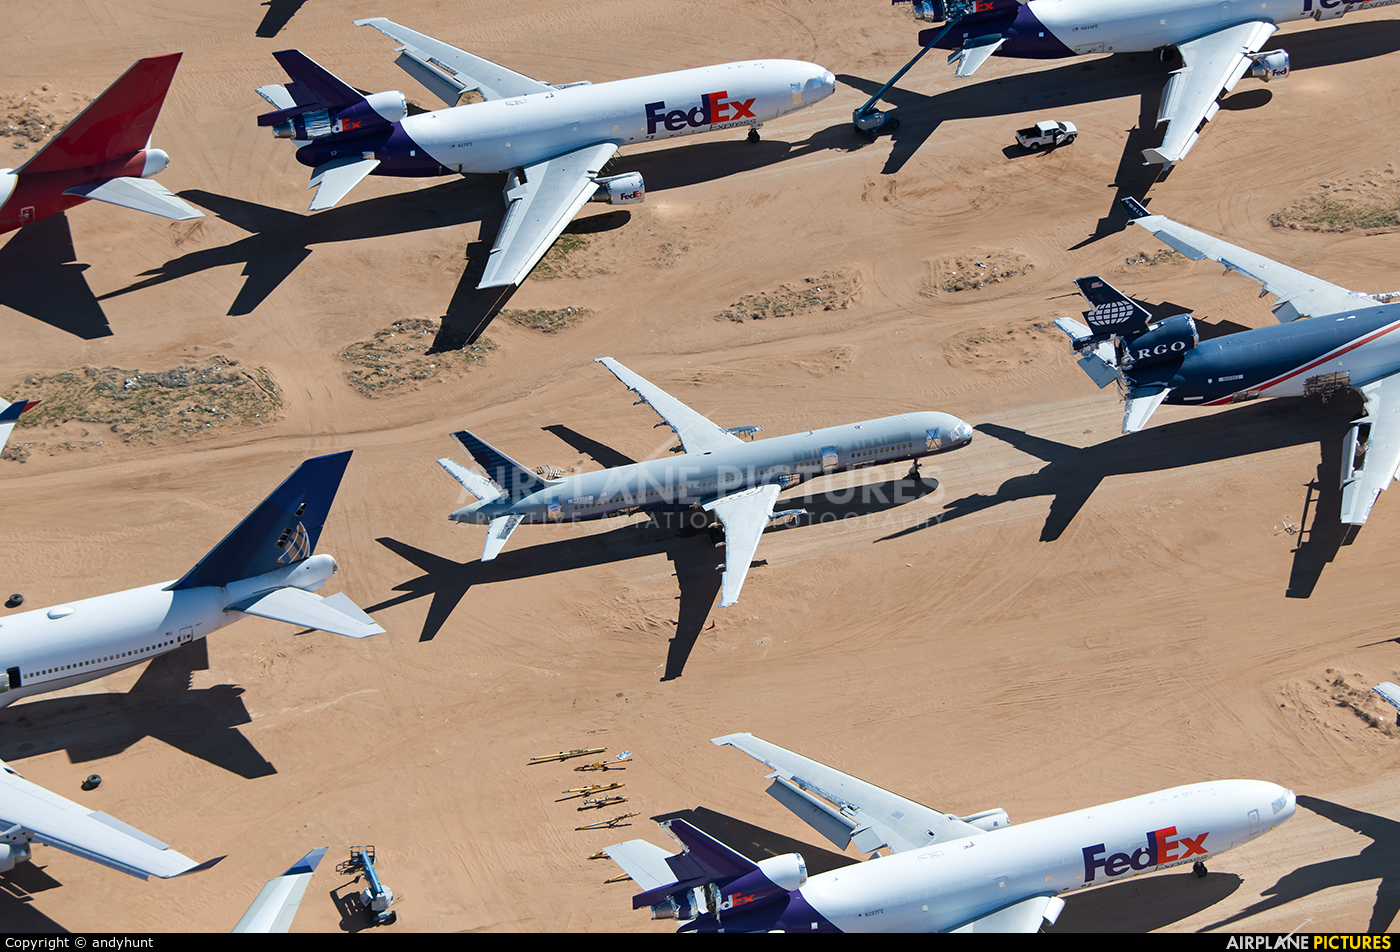 Untitled N68085 aircraft at Victorville - Southern California Logistics